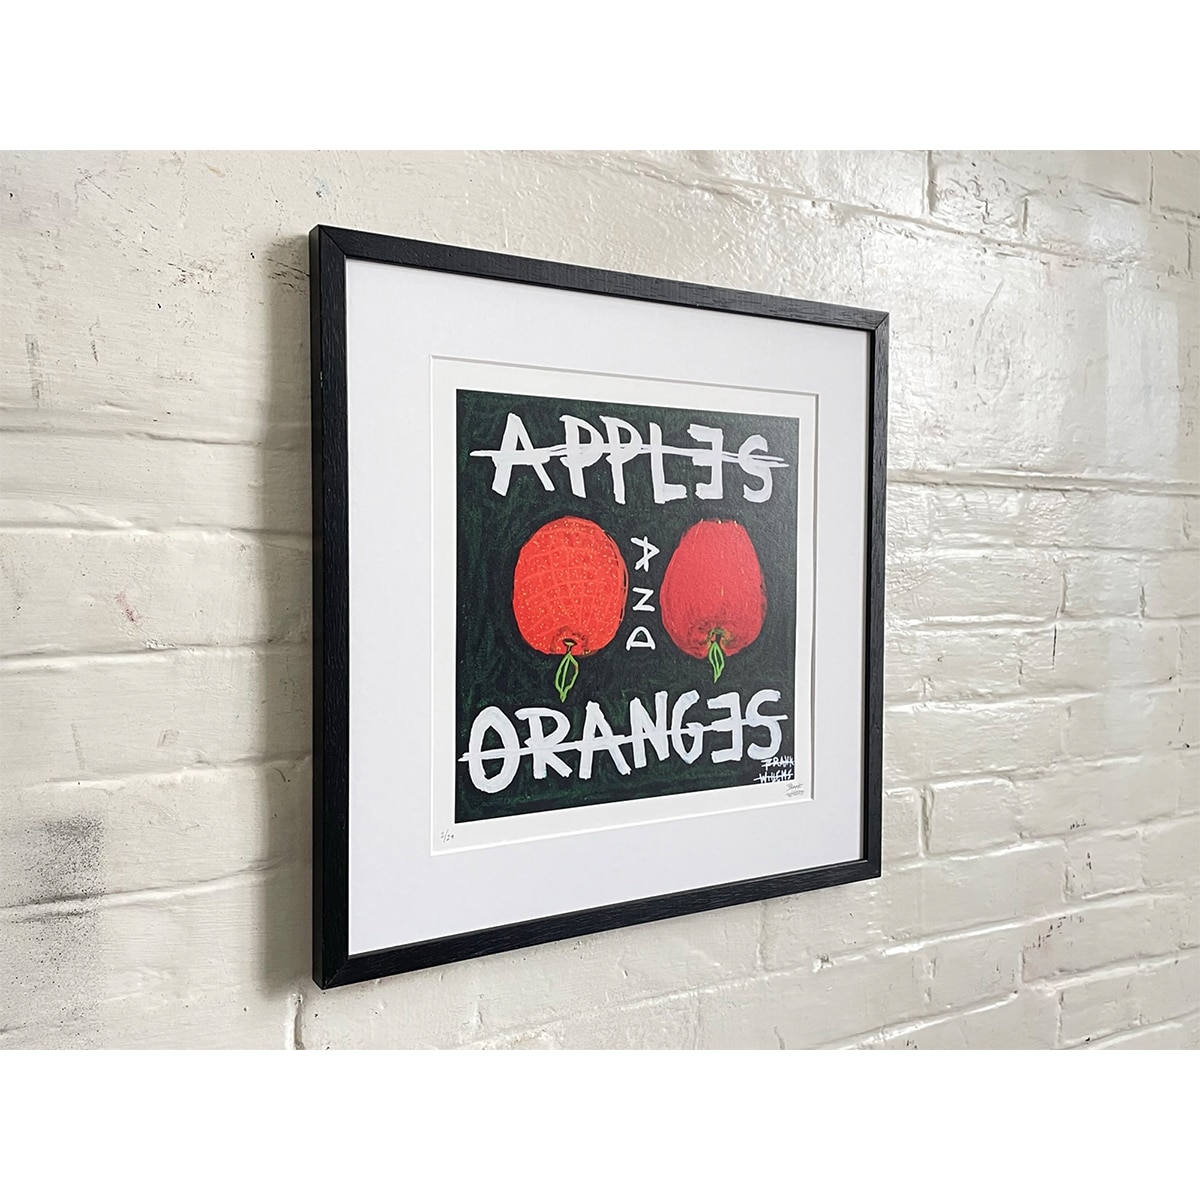 Limited Edt Art Prints -_0000_0_0000_APPLES AND ORANGES 01 - Frank Willems